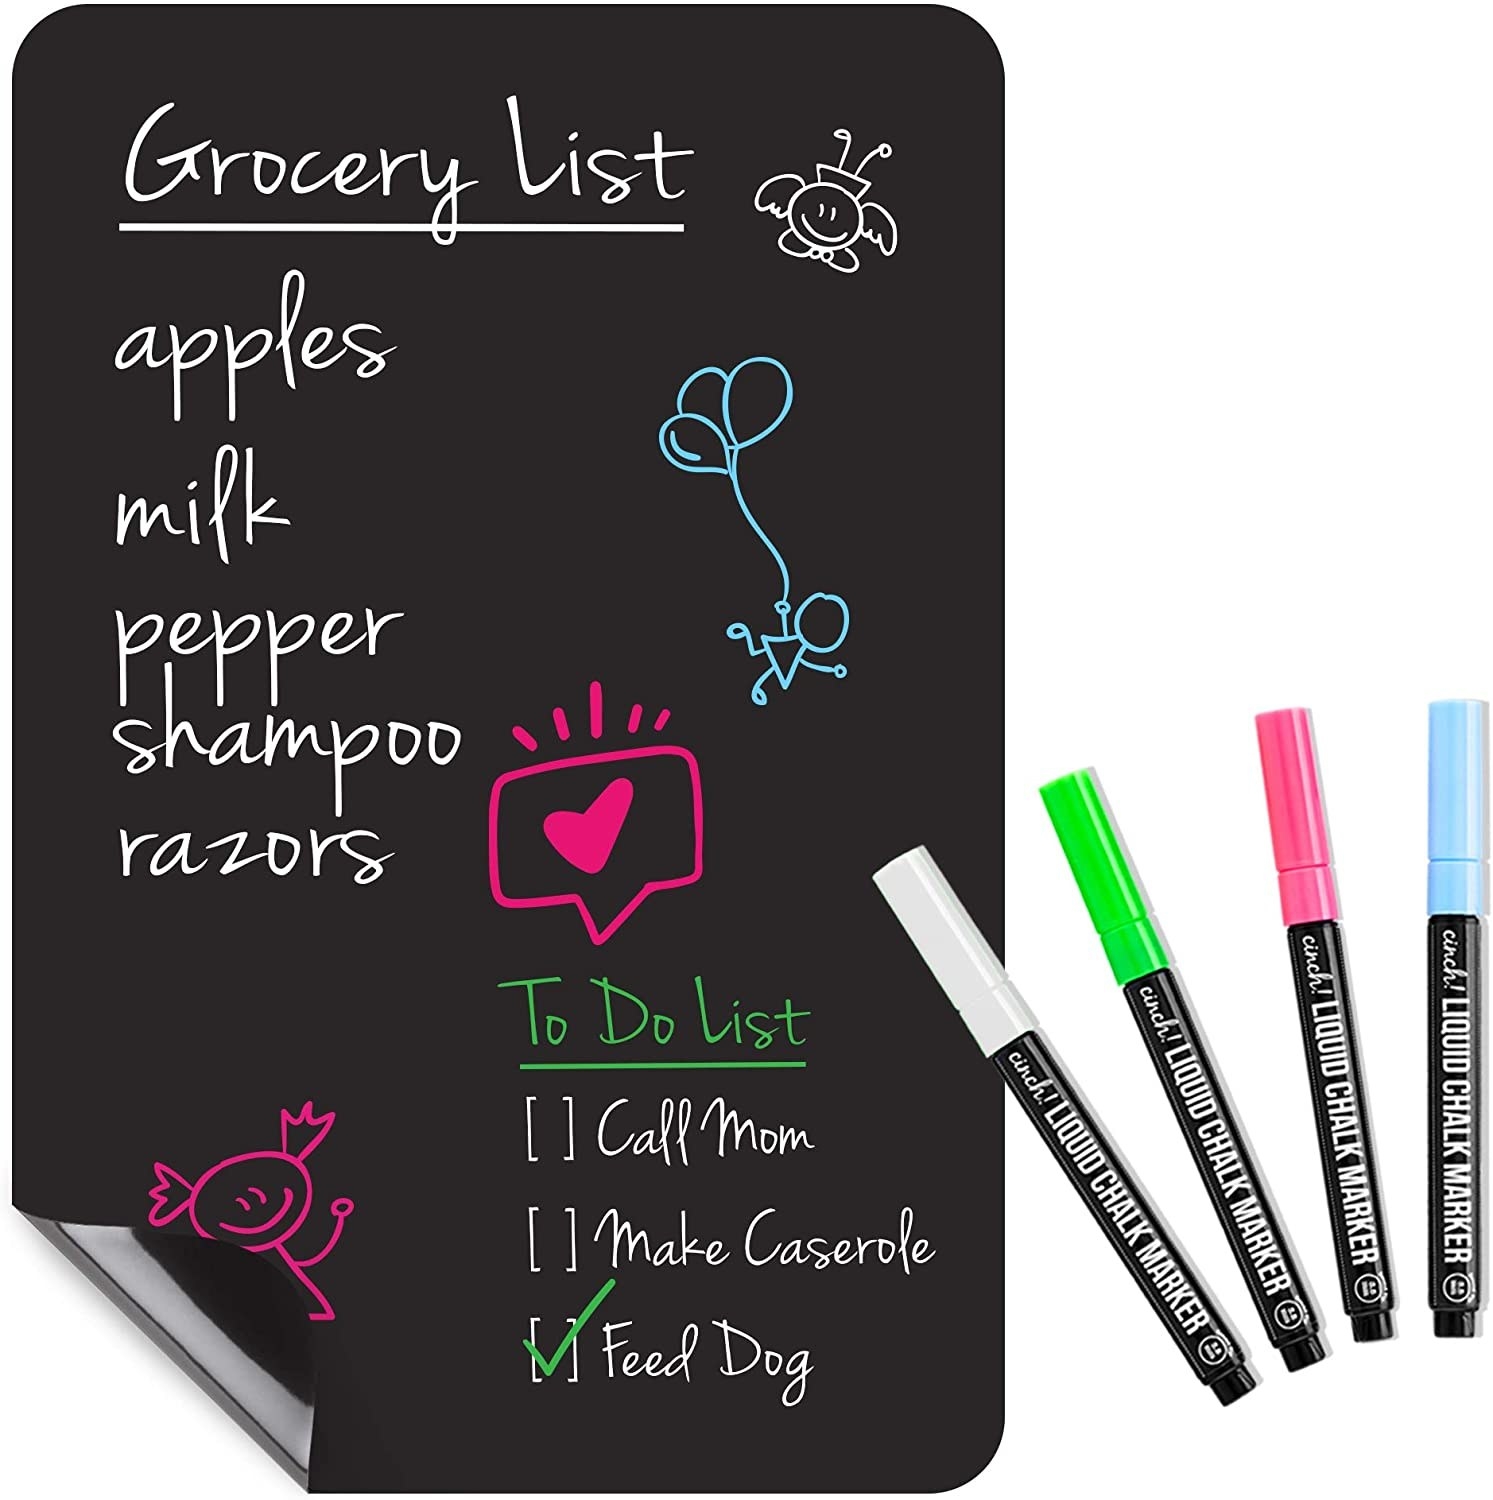 Flexible black dry erase board with white, gree, pink, and blue pens